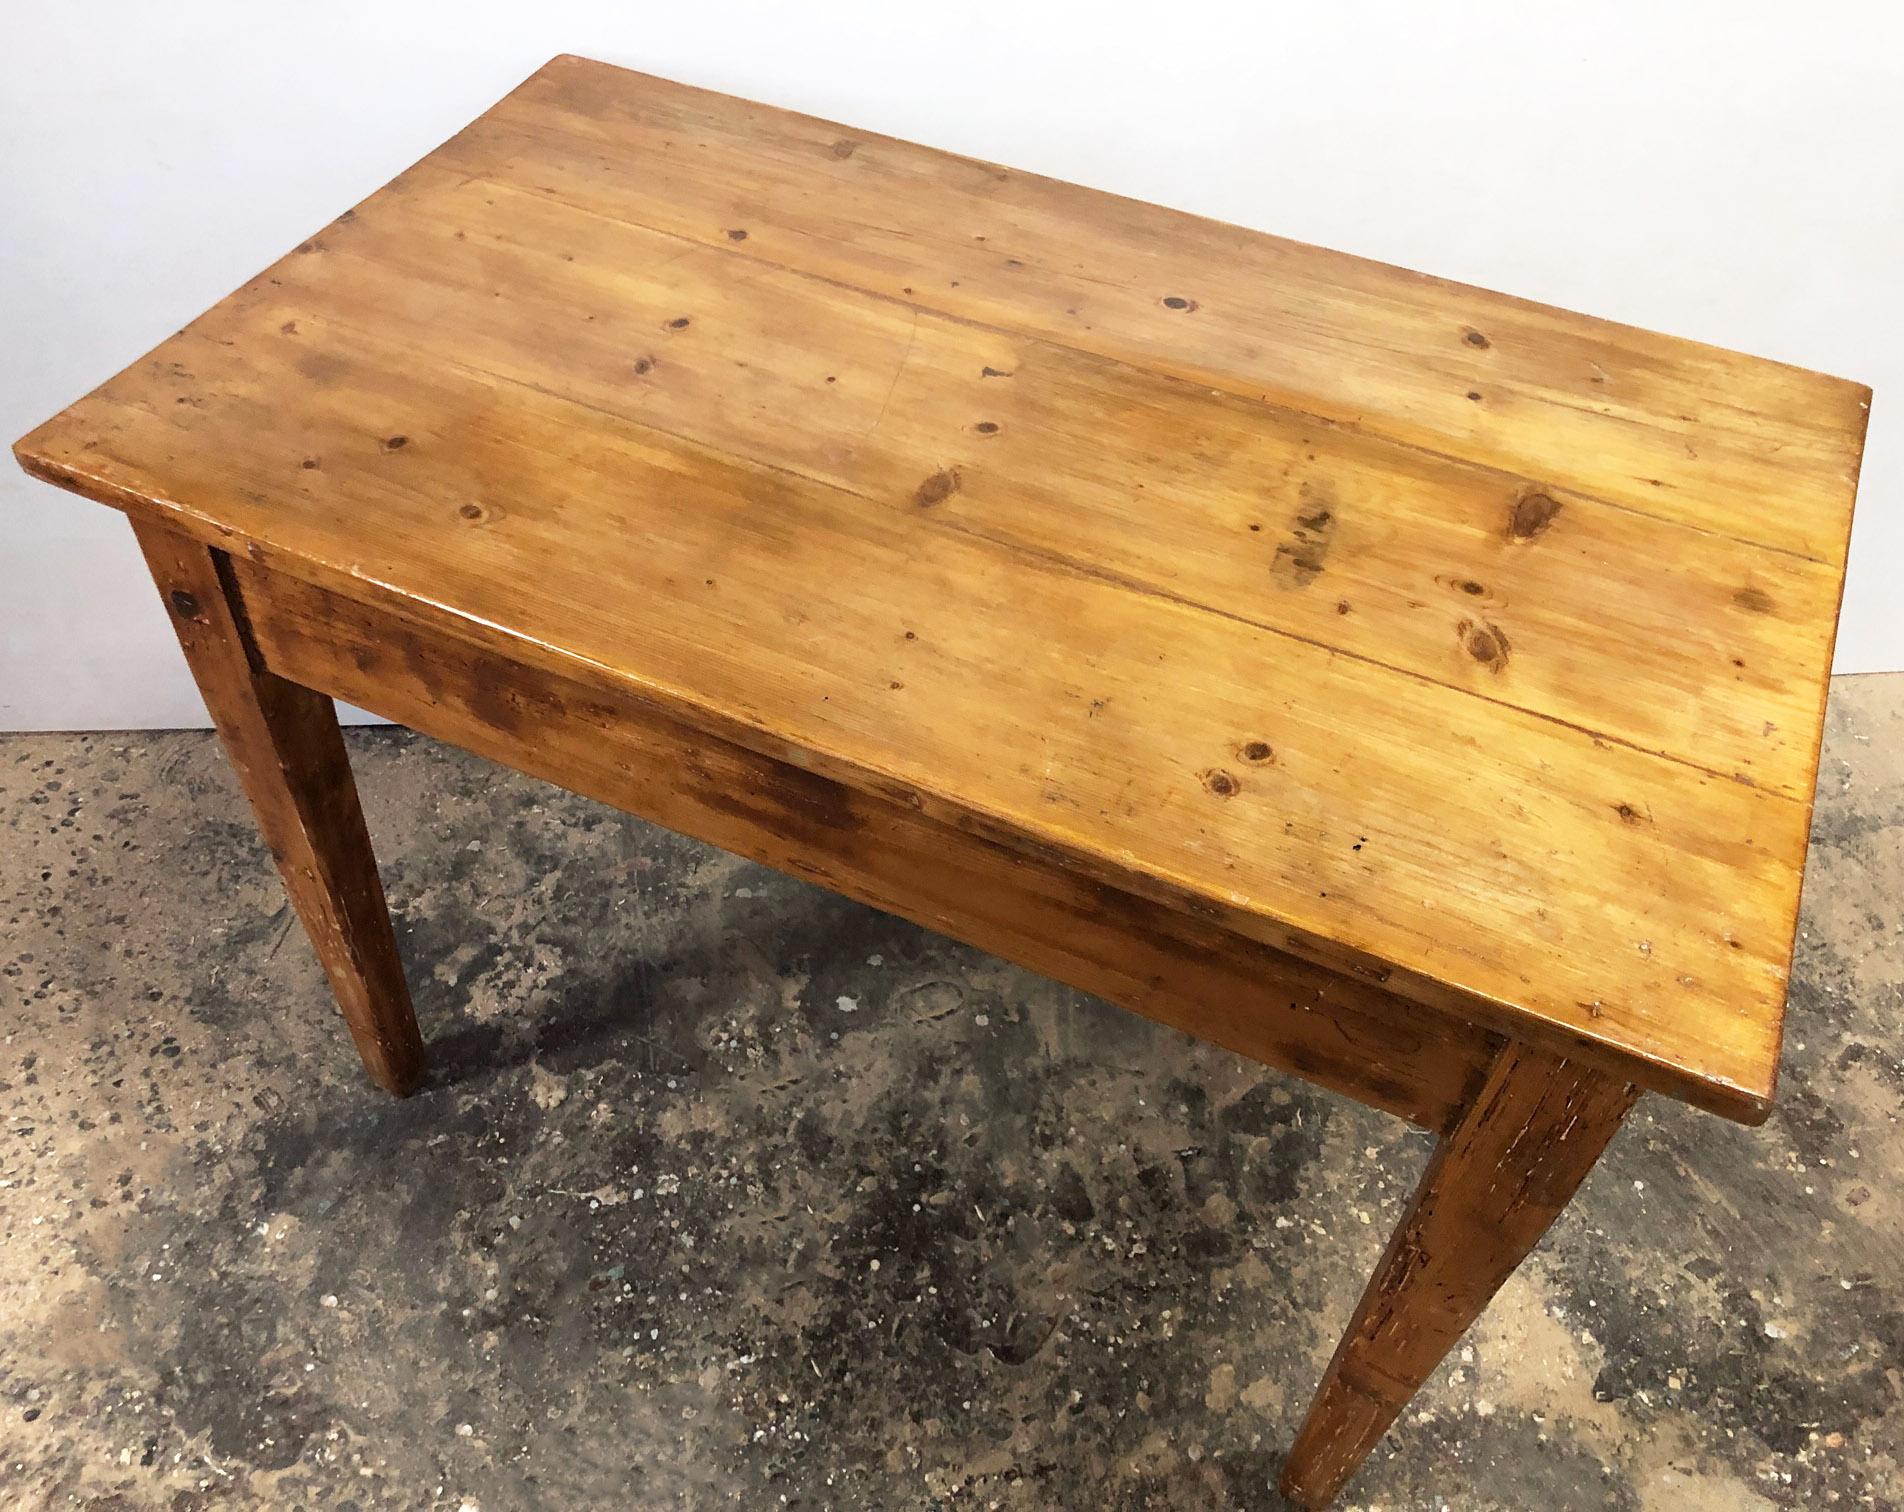 Early 20th Century Rustic Tuscan Fir Desk Table, Original from 1900, Honey Color